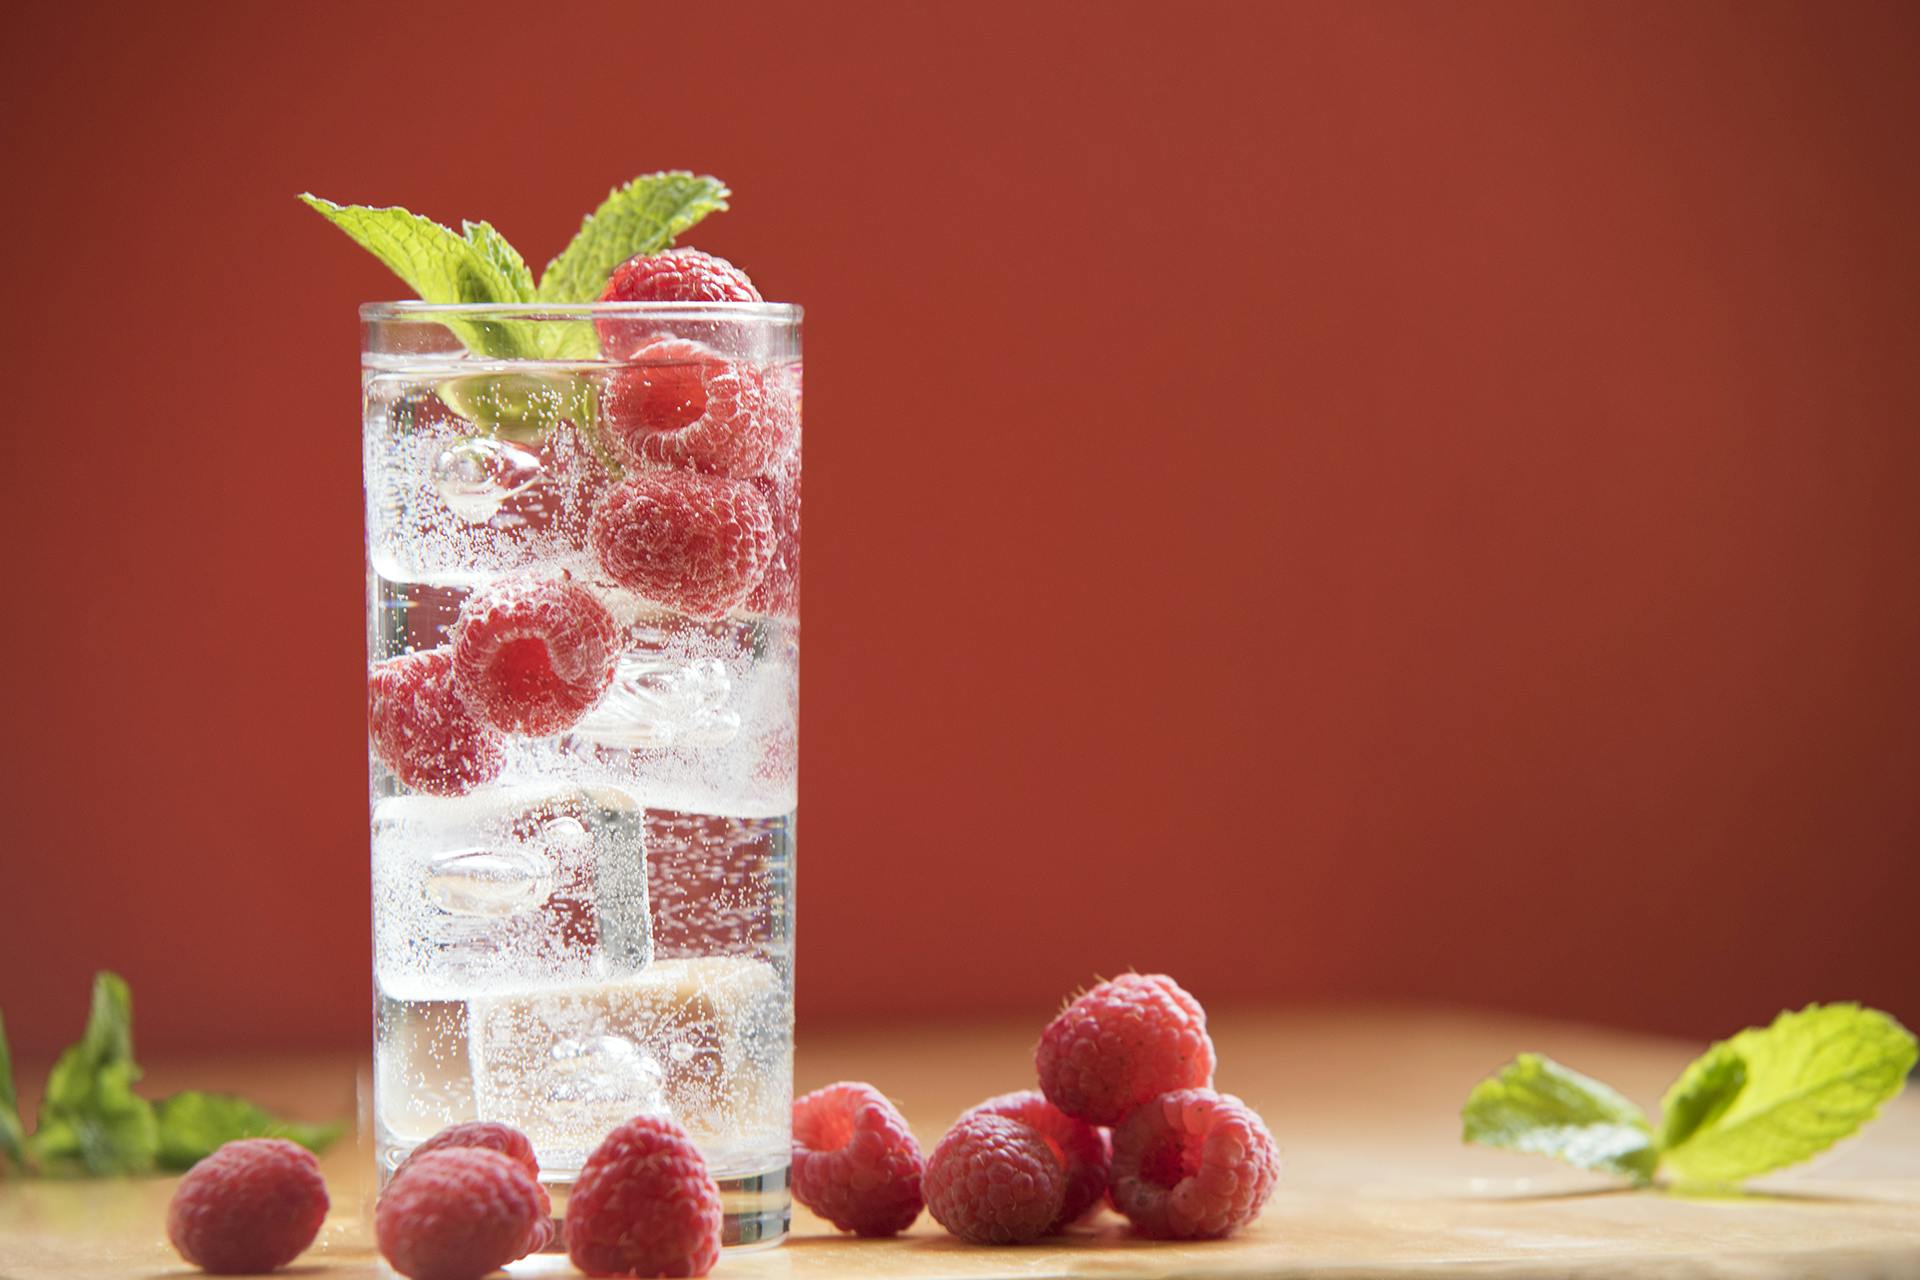 Image of a glass with strawberries and ice cubes